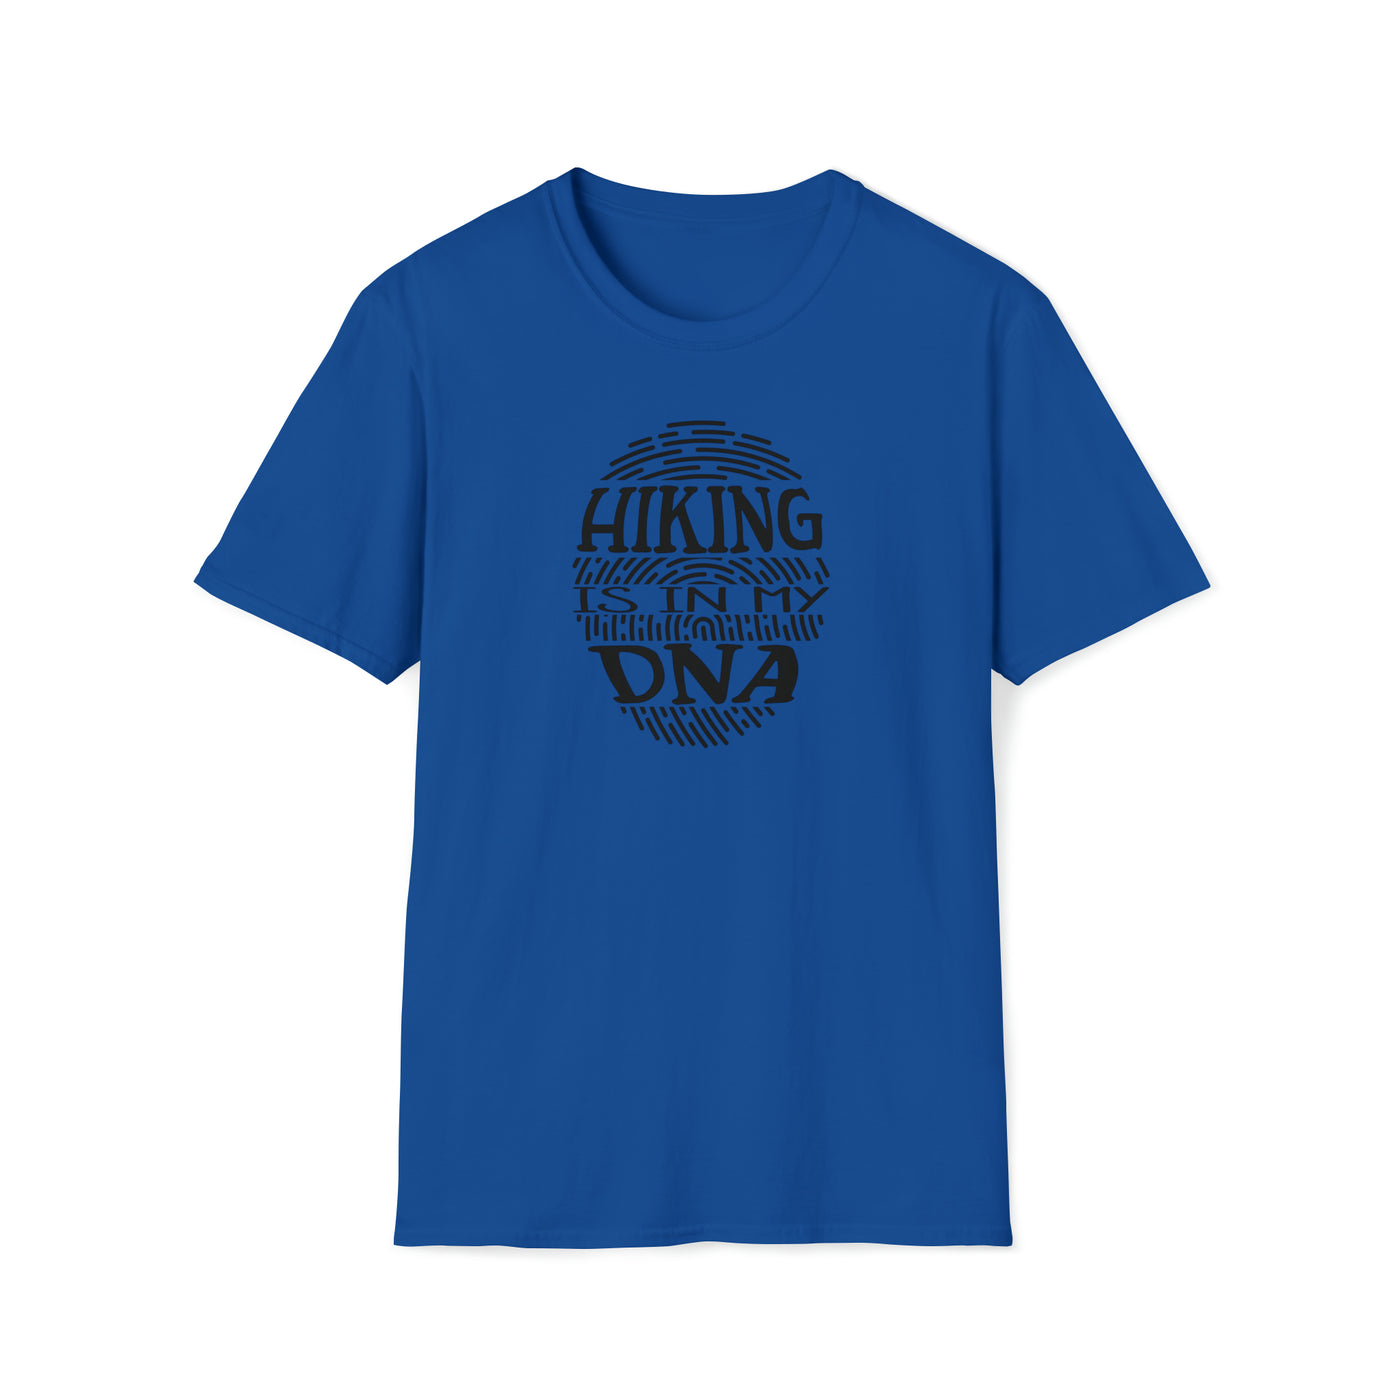 Hiking is in my DNA Unisex Softstyle T-Shirt